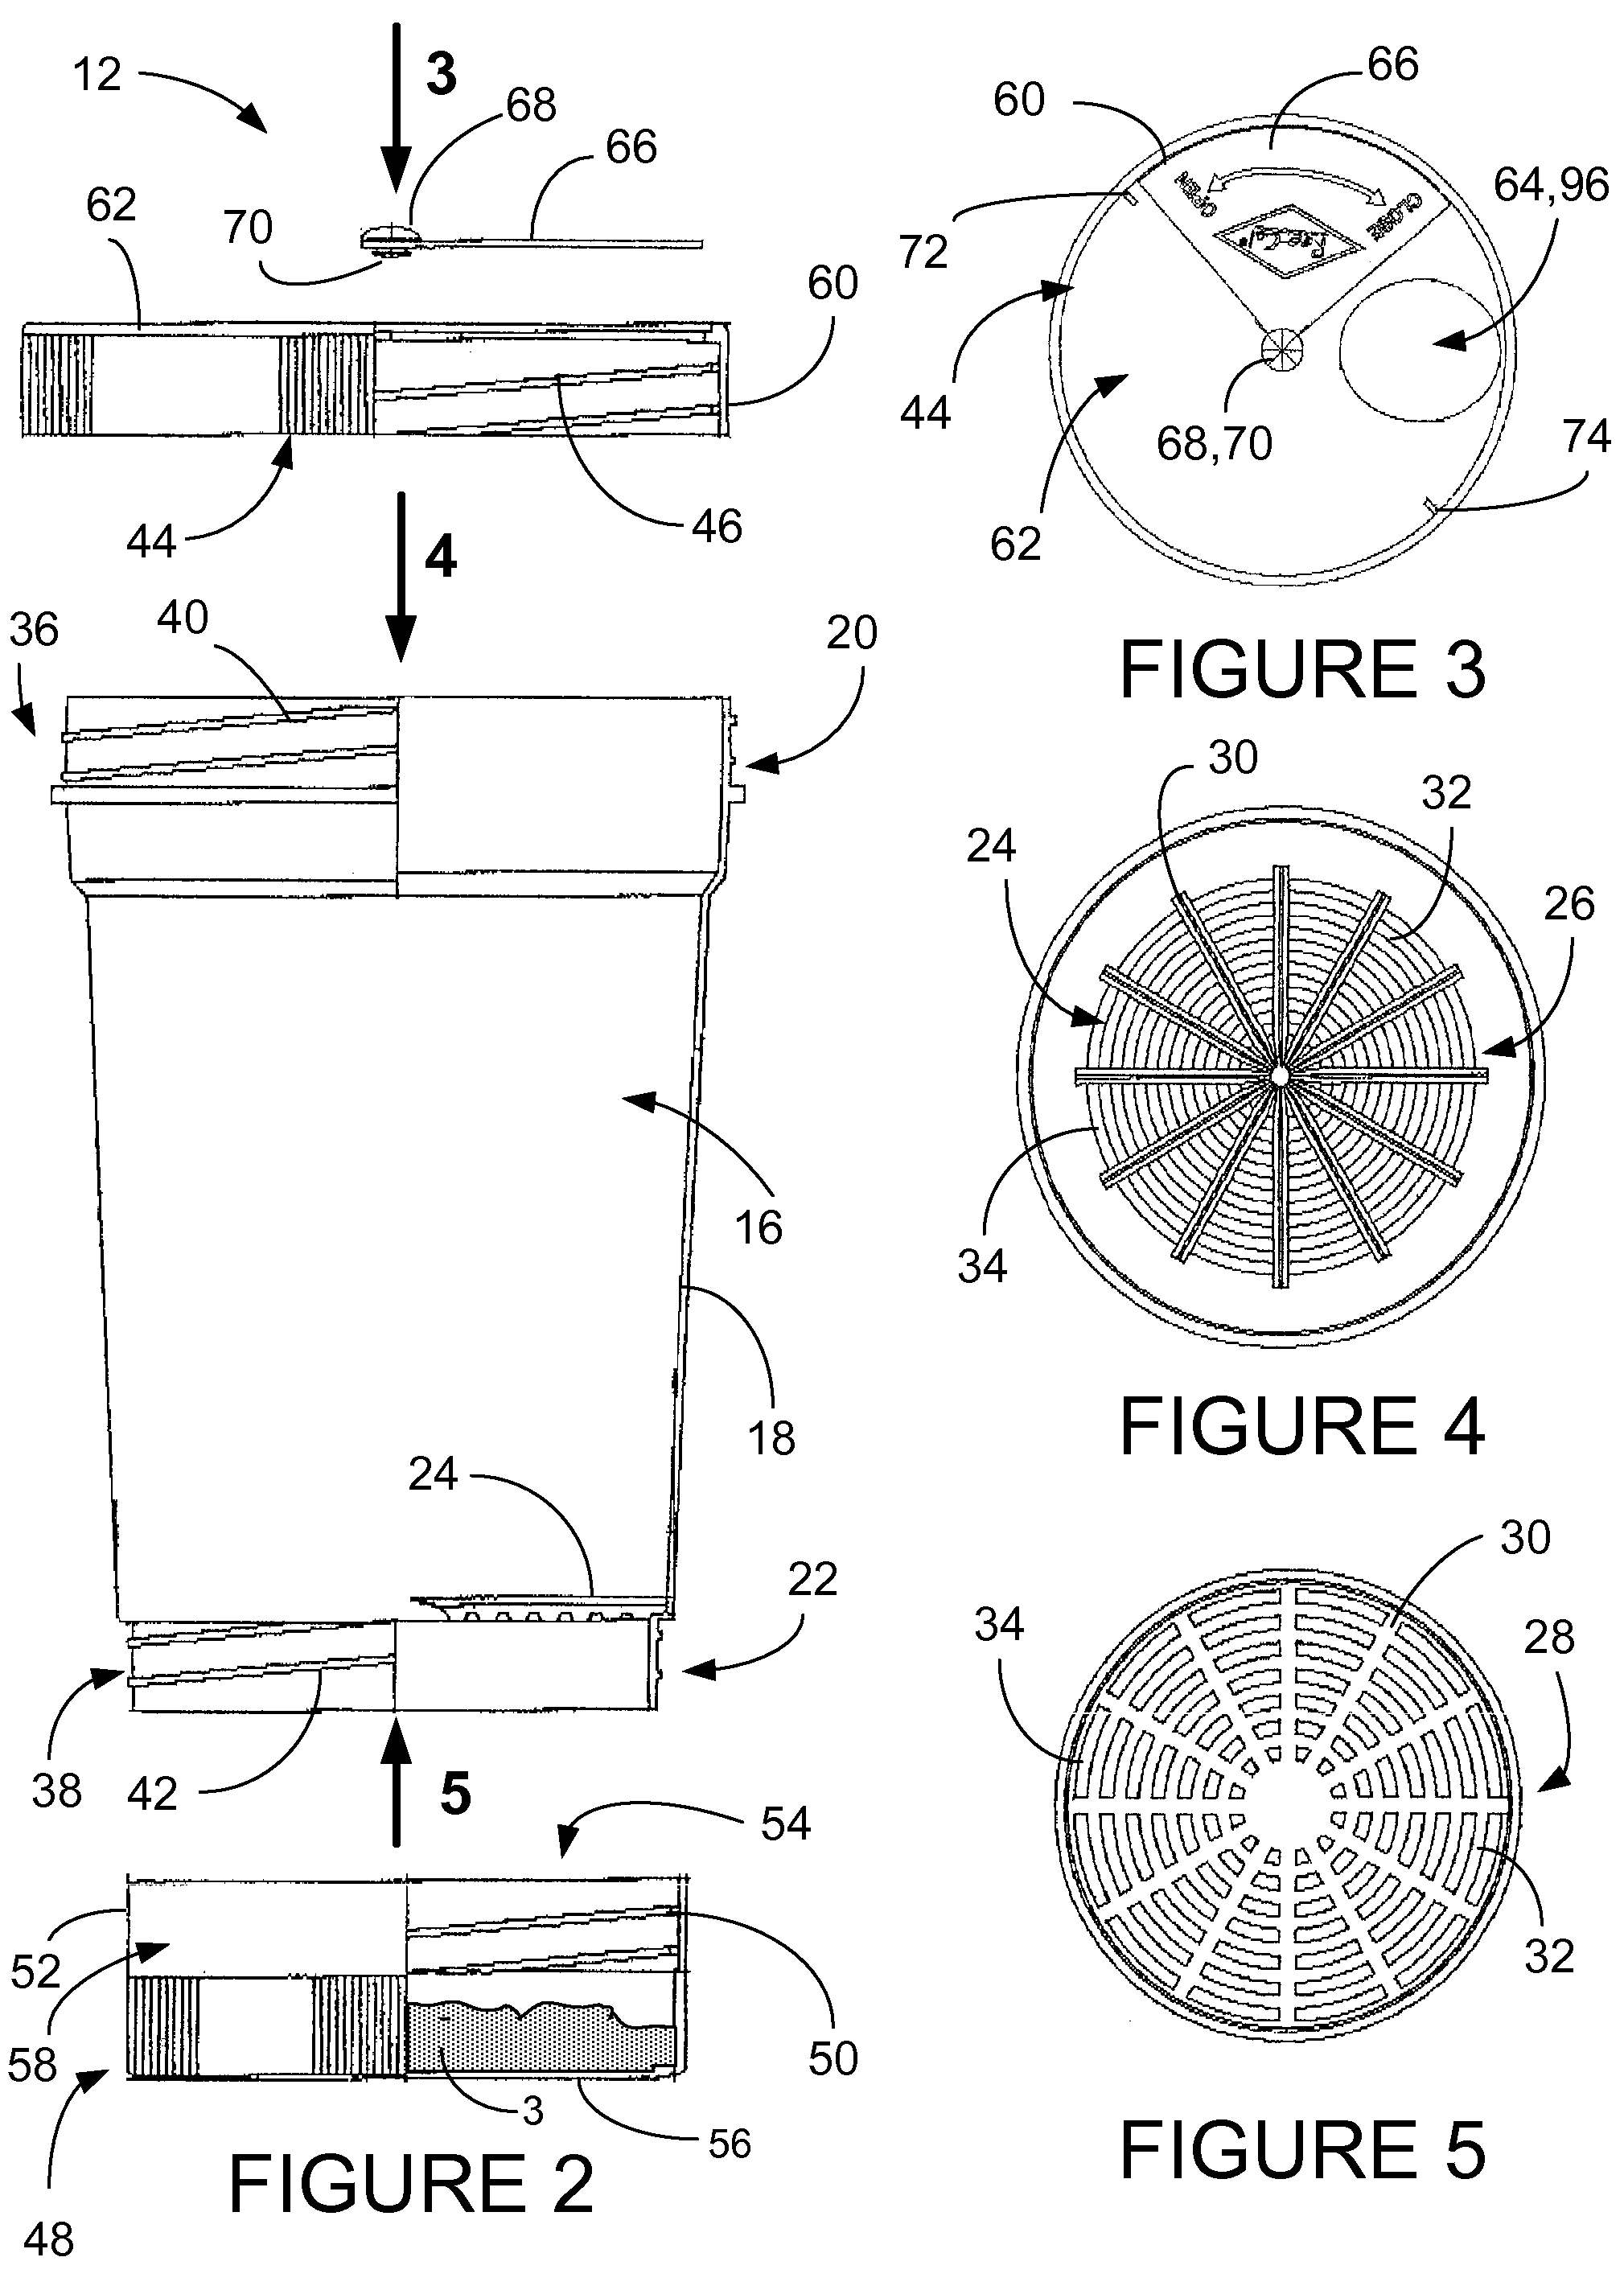 Insect dusting apparatus and method